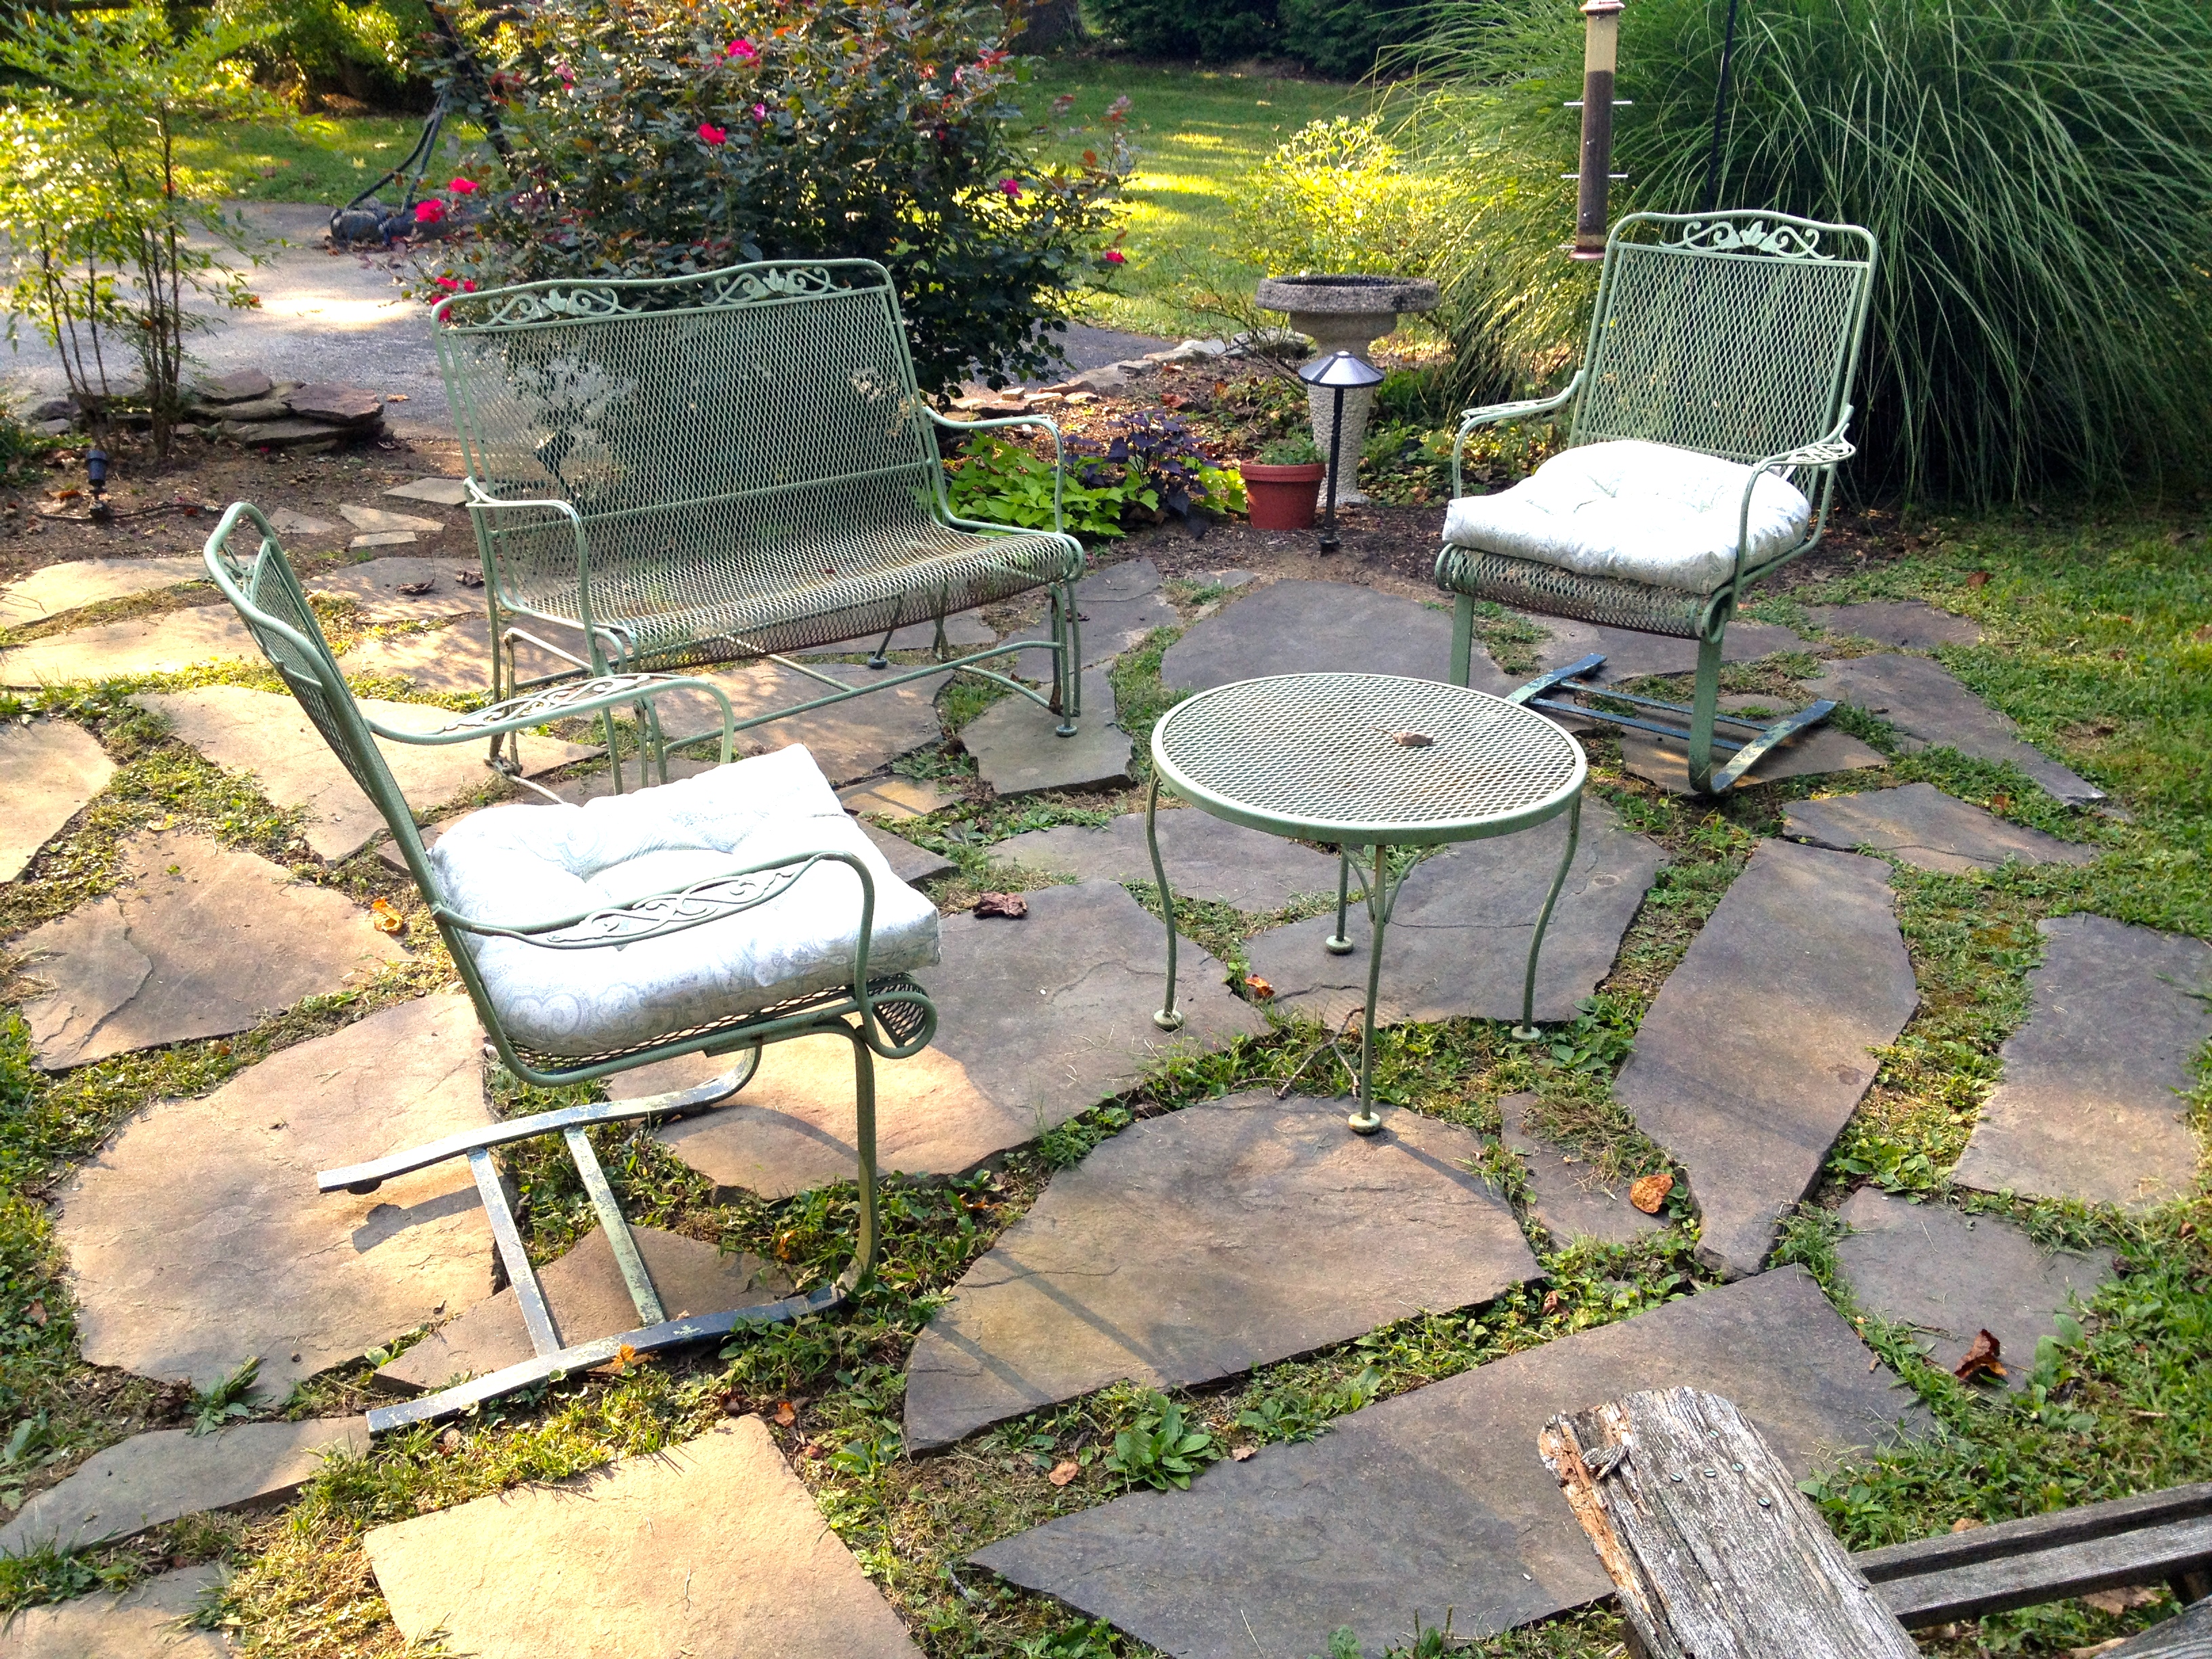 A Quick and Dirty Flagstone Patio | A Girl's Guide to DIY